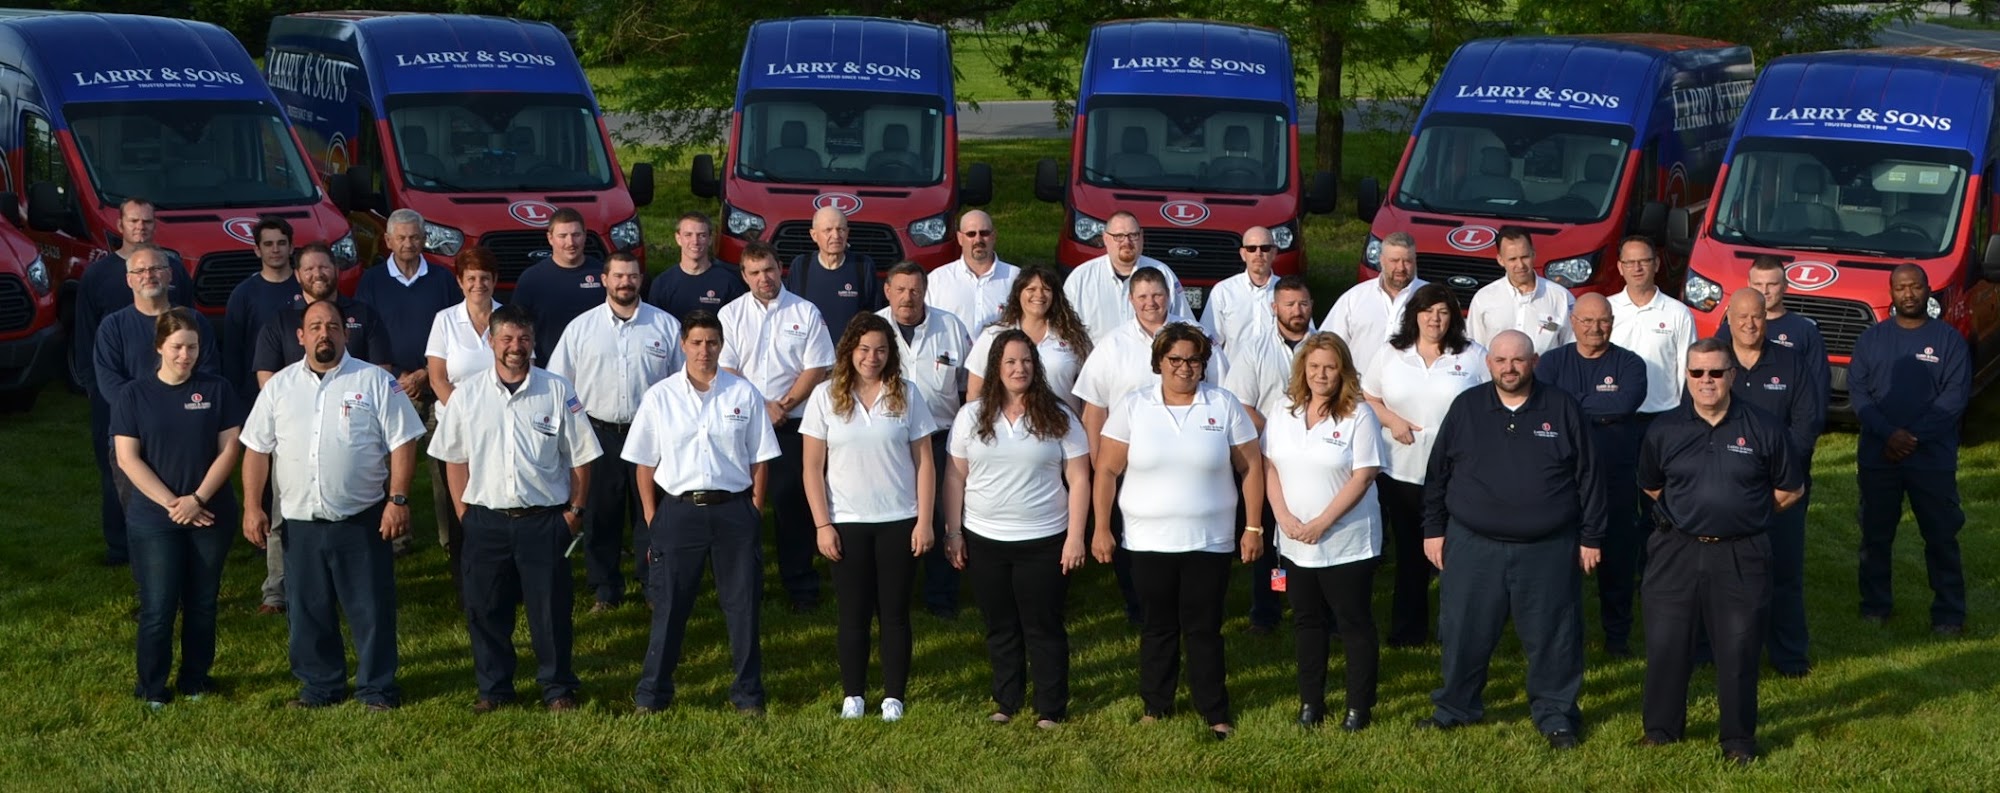 Larry & Sons Plumbing, Heating, Cooling, Drain & Electrical